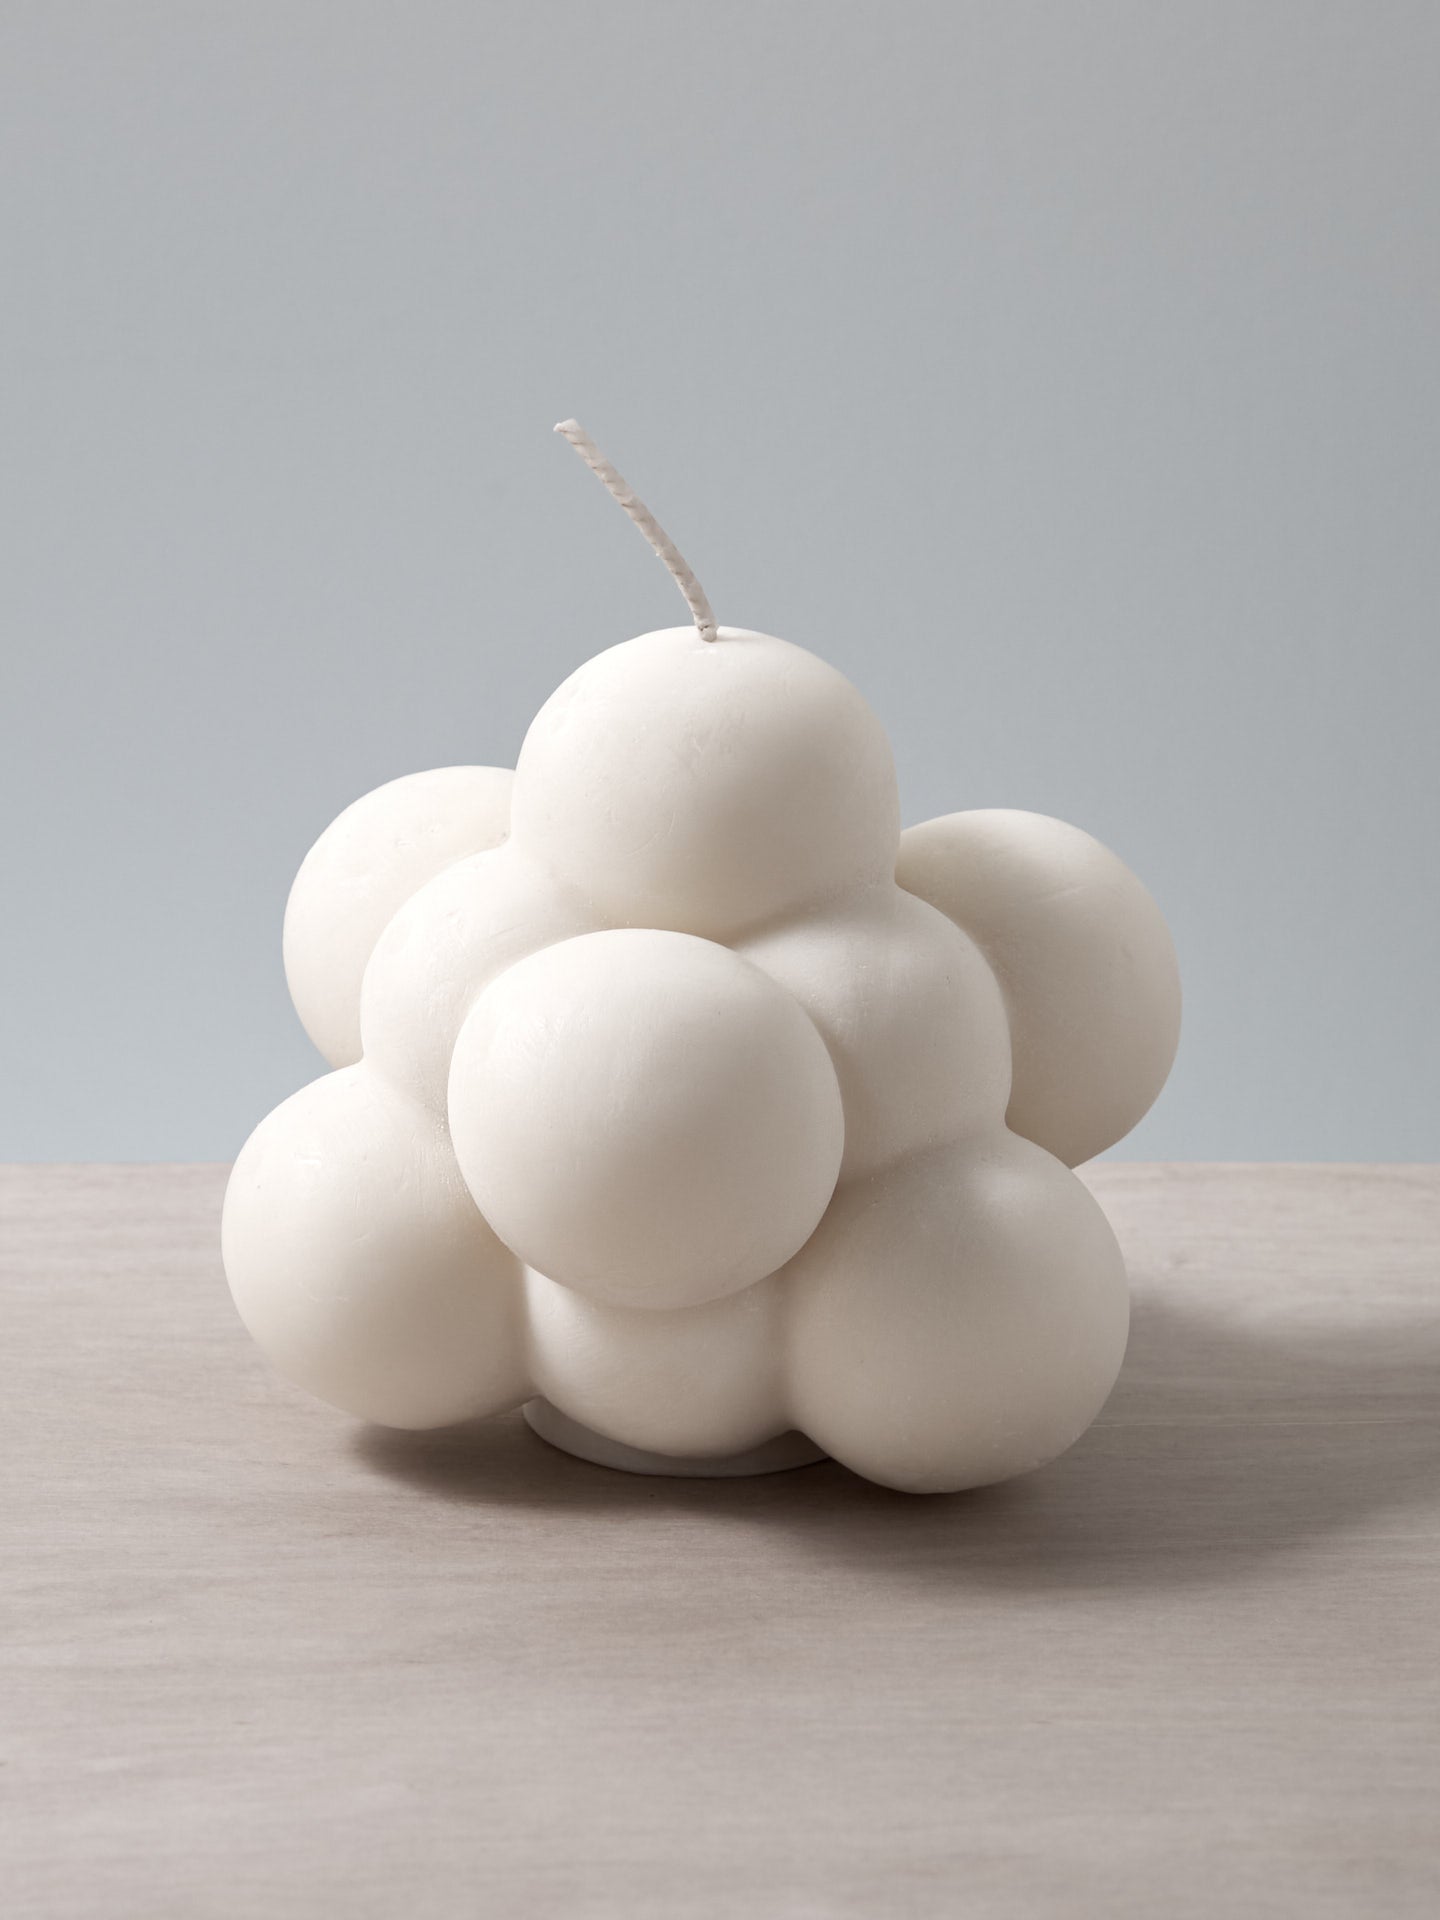 An Andrej Urem Molecule Candle shaped like a cloud sitting on a table.